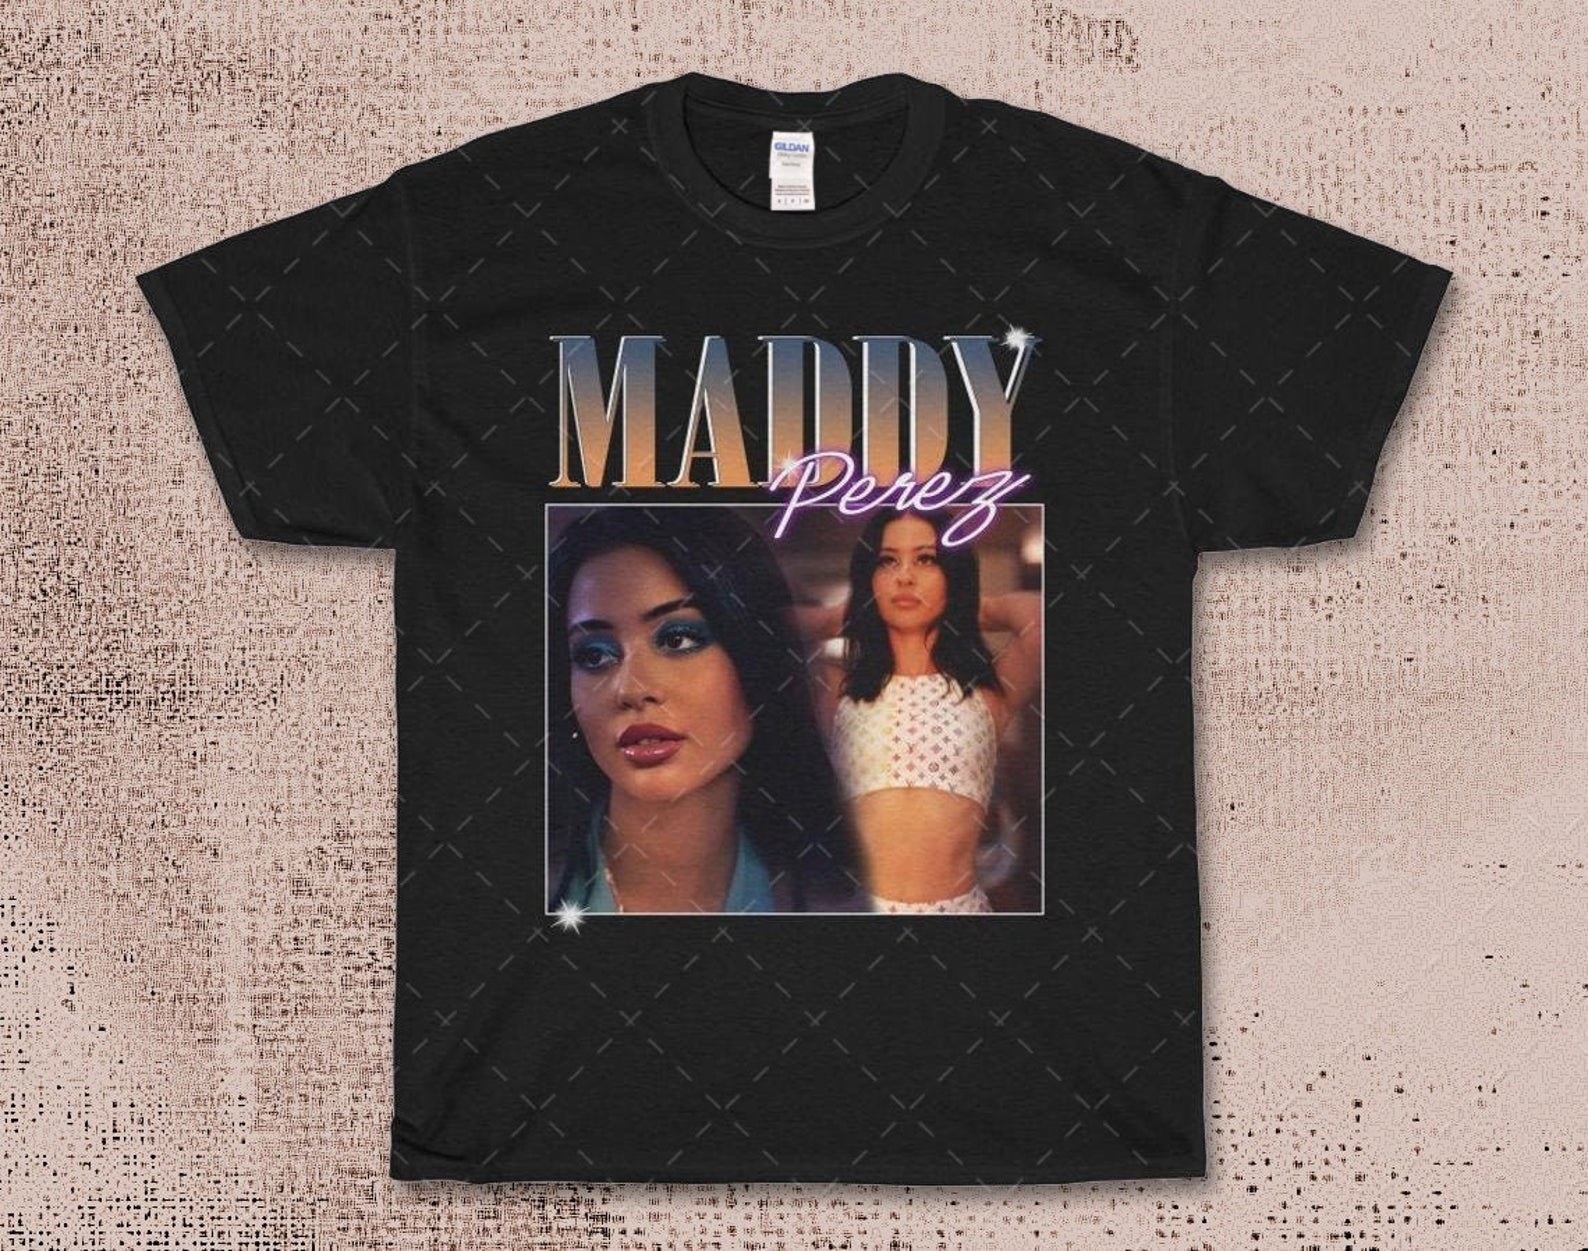 a watermarked vintage maddy perez t-shirt